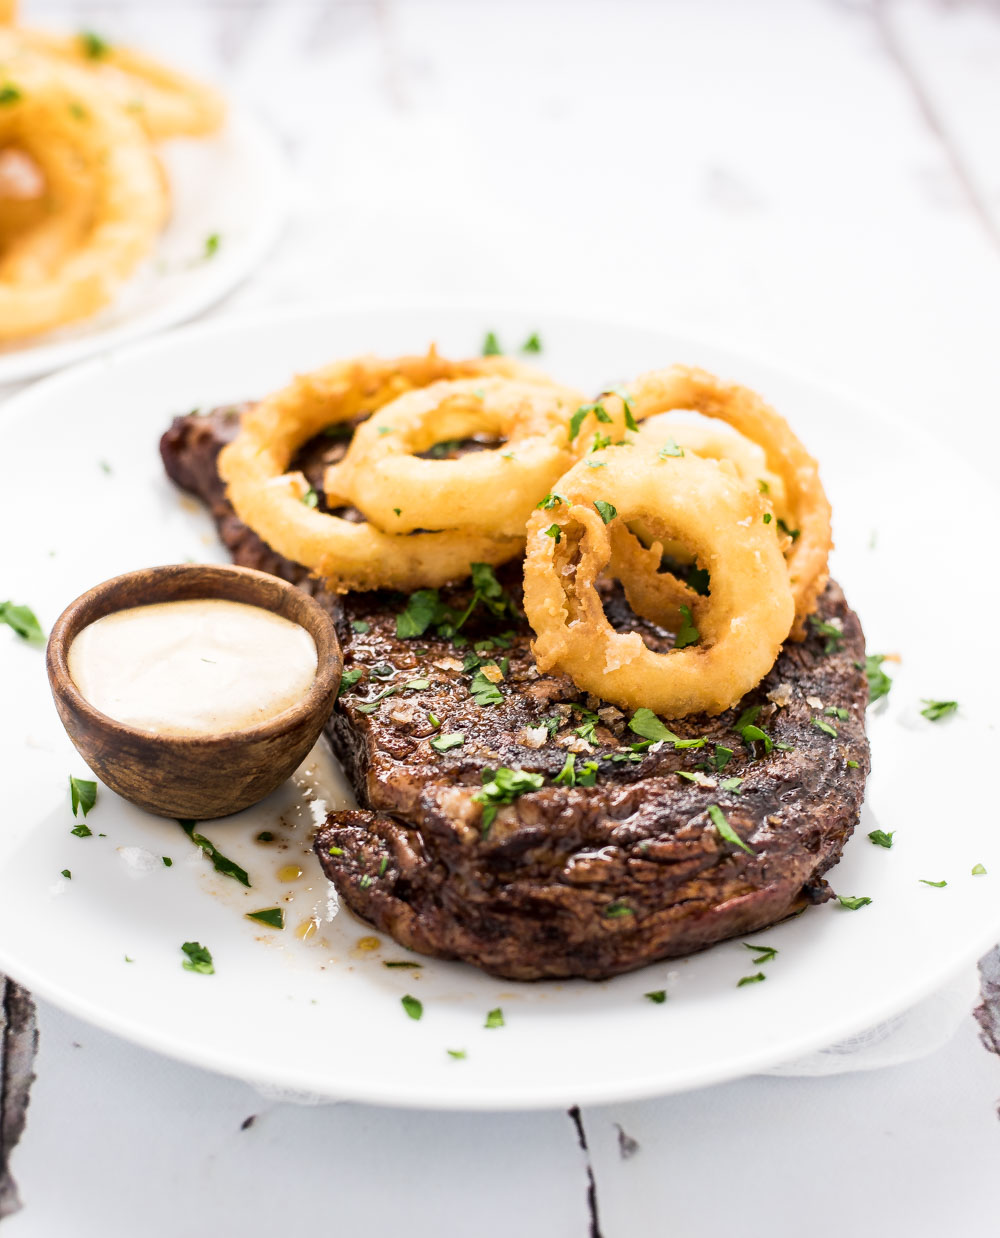 Create a meal worthy of a steakhouse with this chili-rubbed ribeye Steak with beer-battered onion rings!